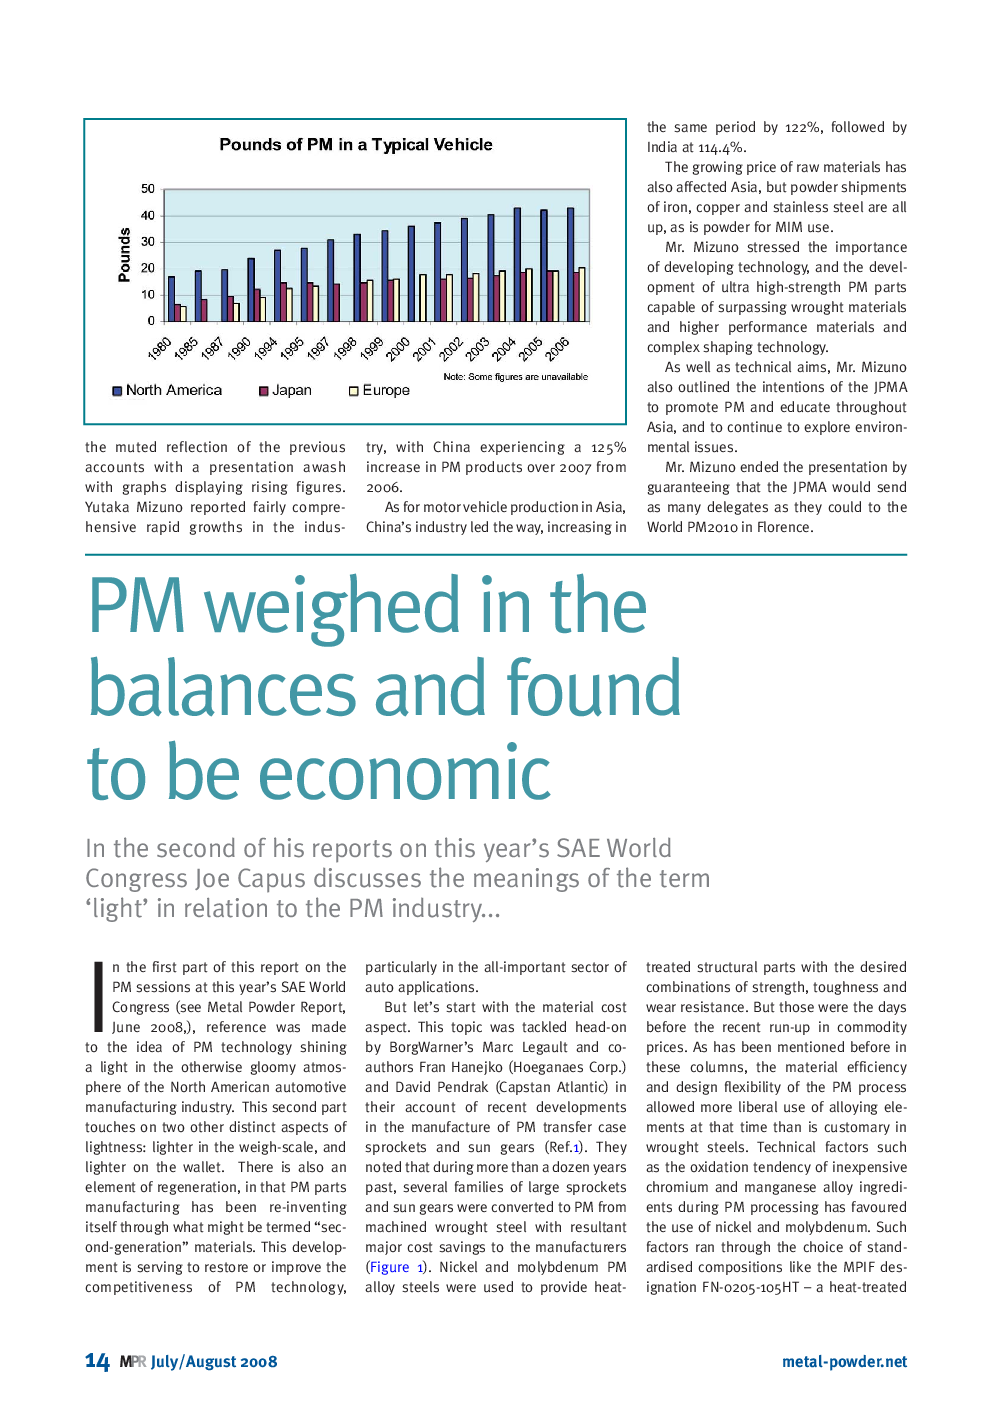 PM weighed in the balances and found to be economic